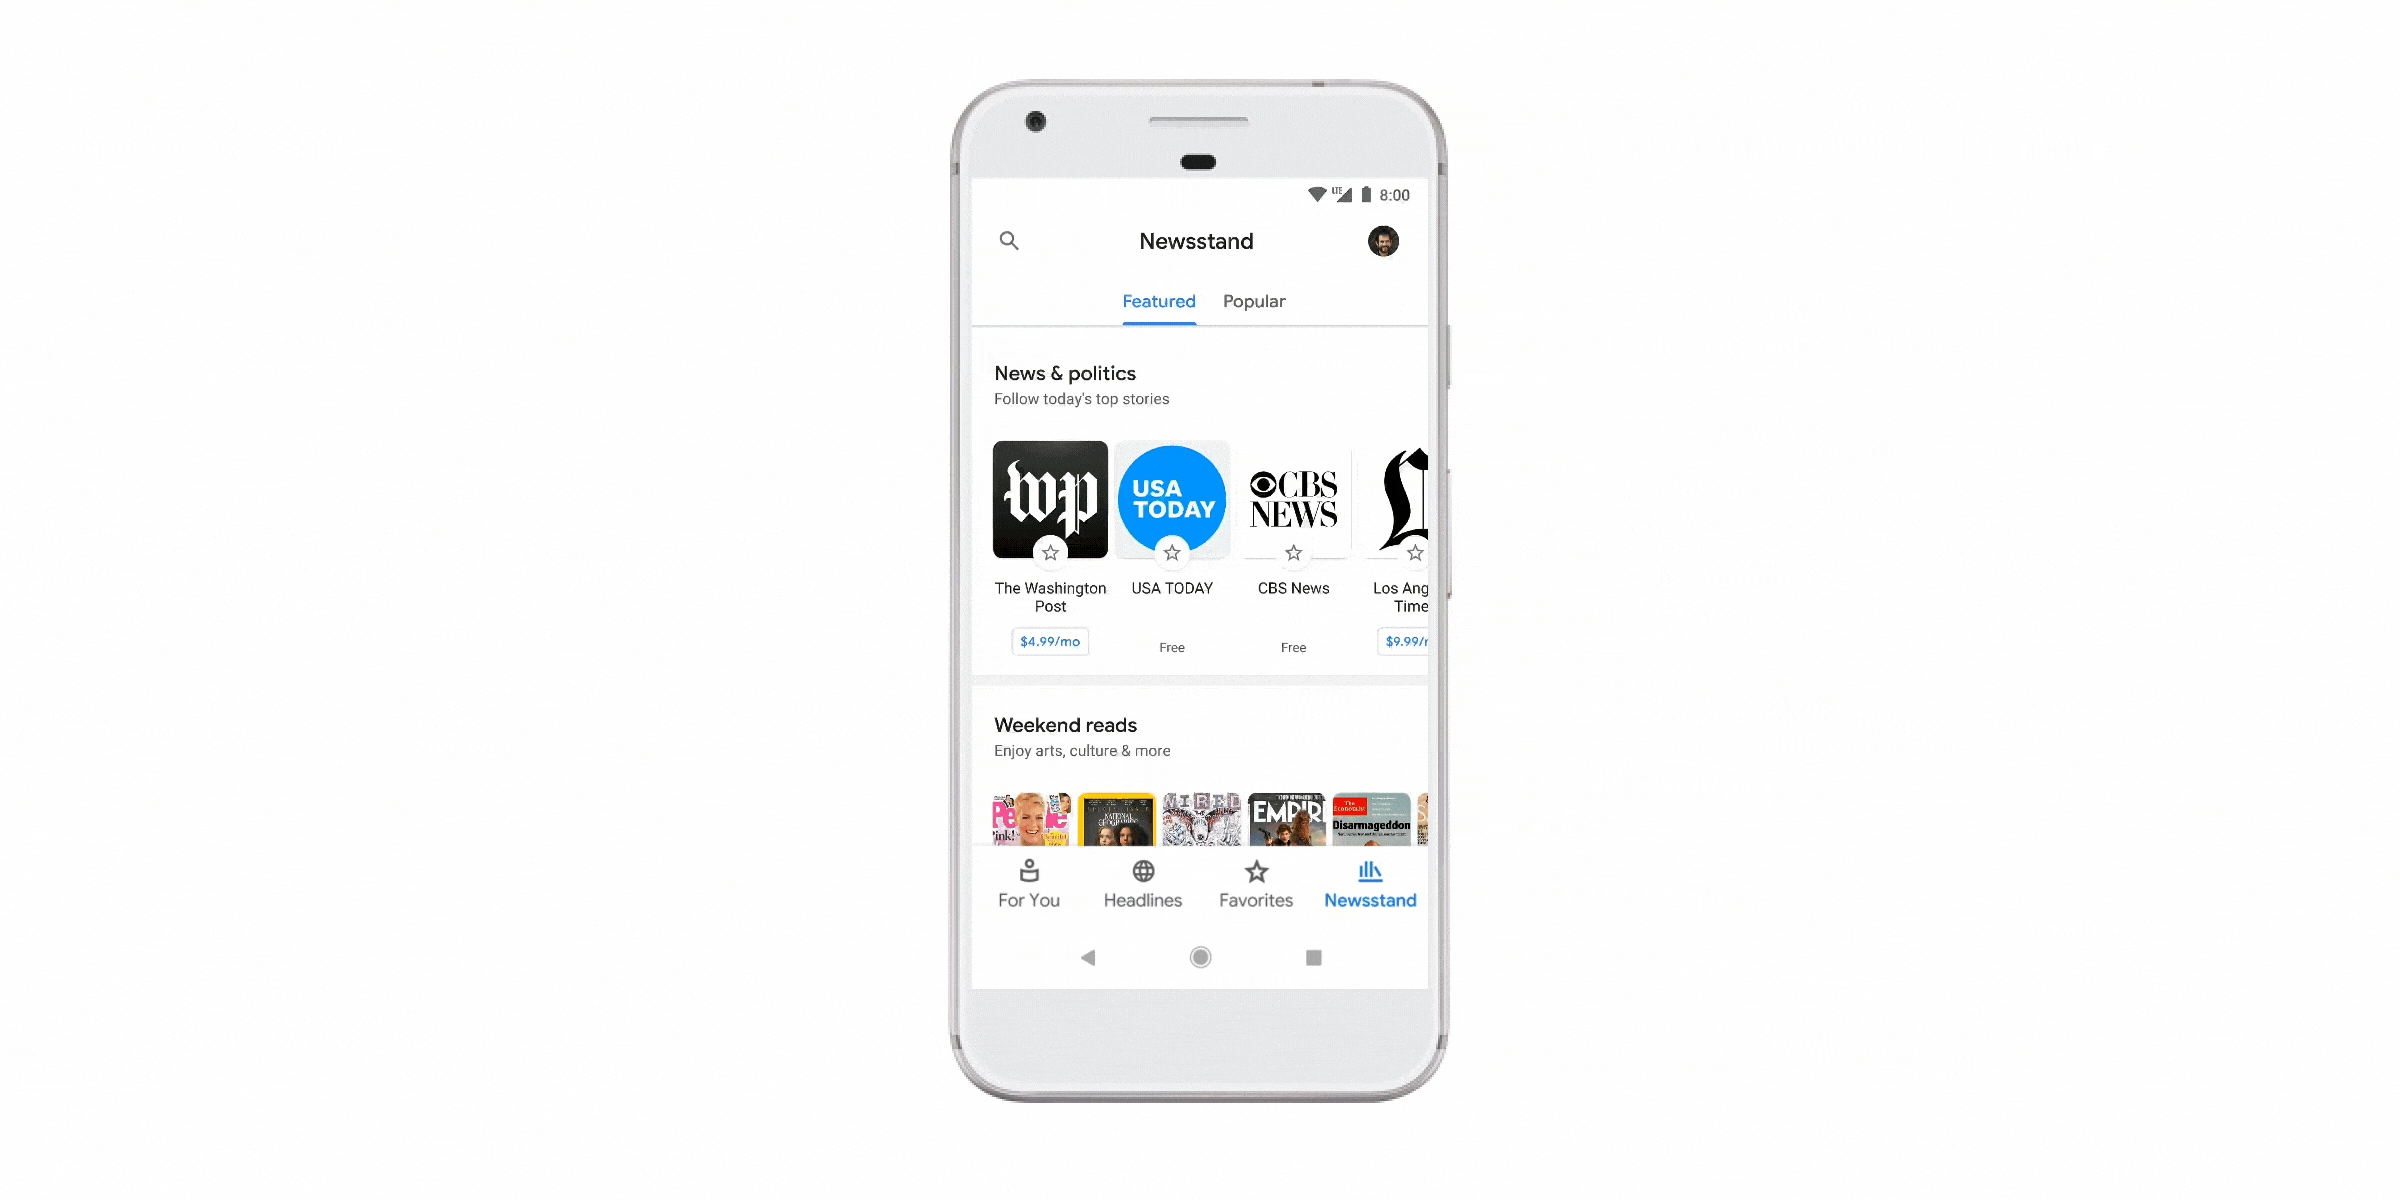 The Newsstand tab makes it easy to find and follow the sources you trust, as well as browse and discover new ones